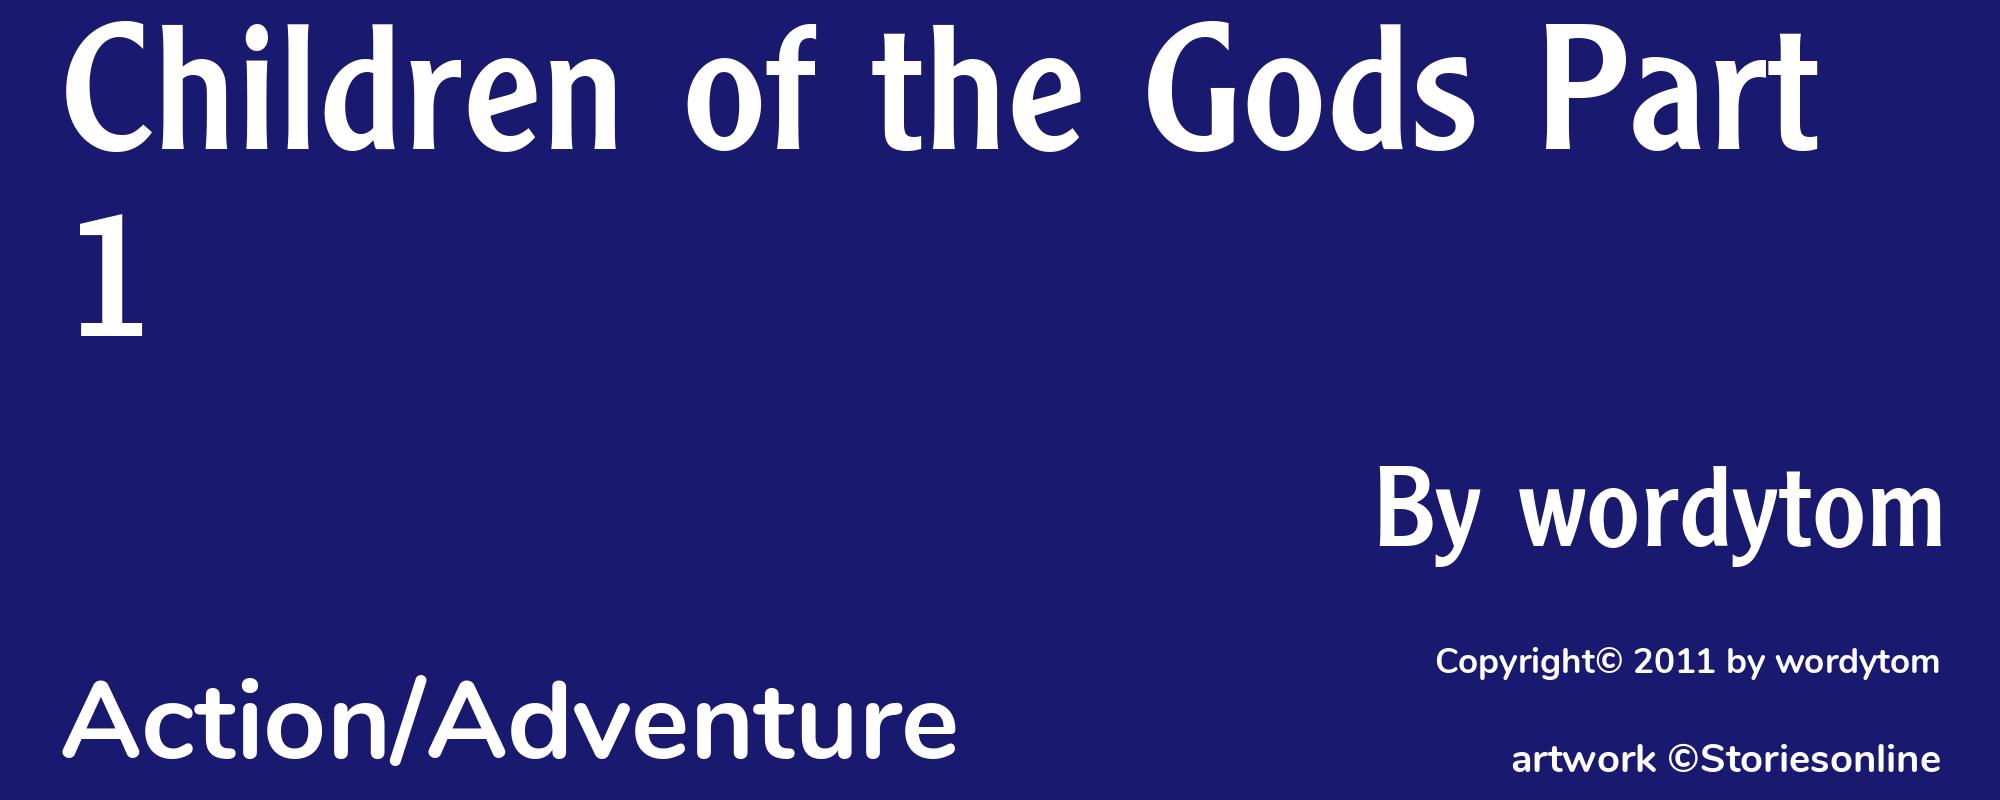 Children of the Gods Part 1 - Cover